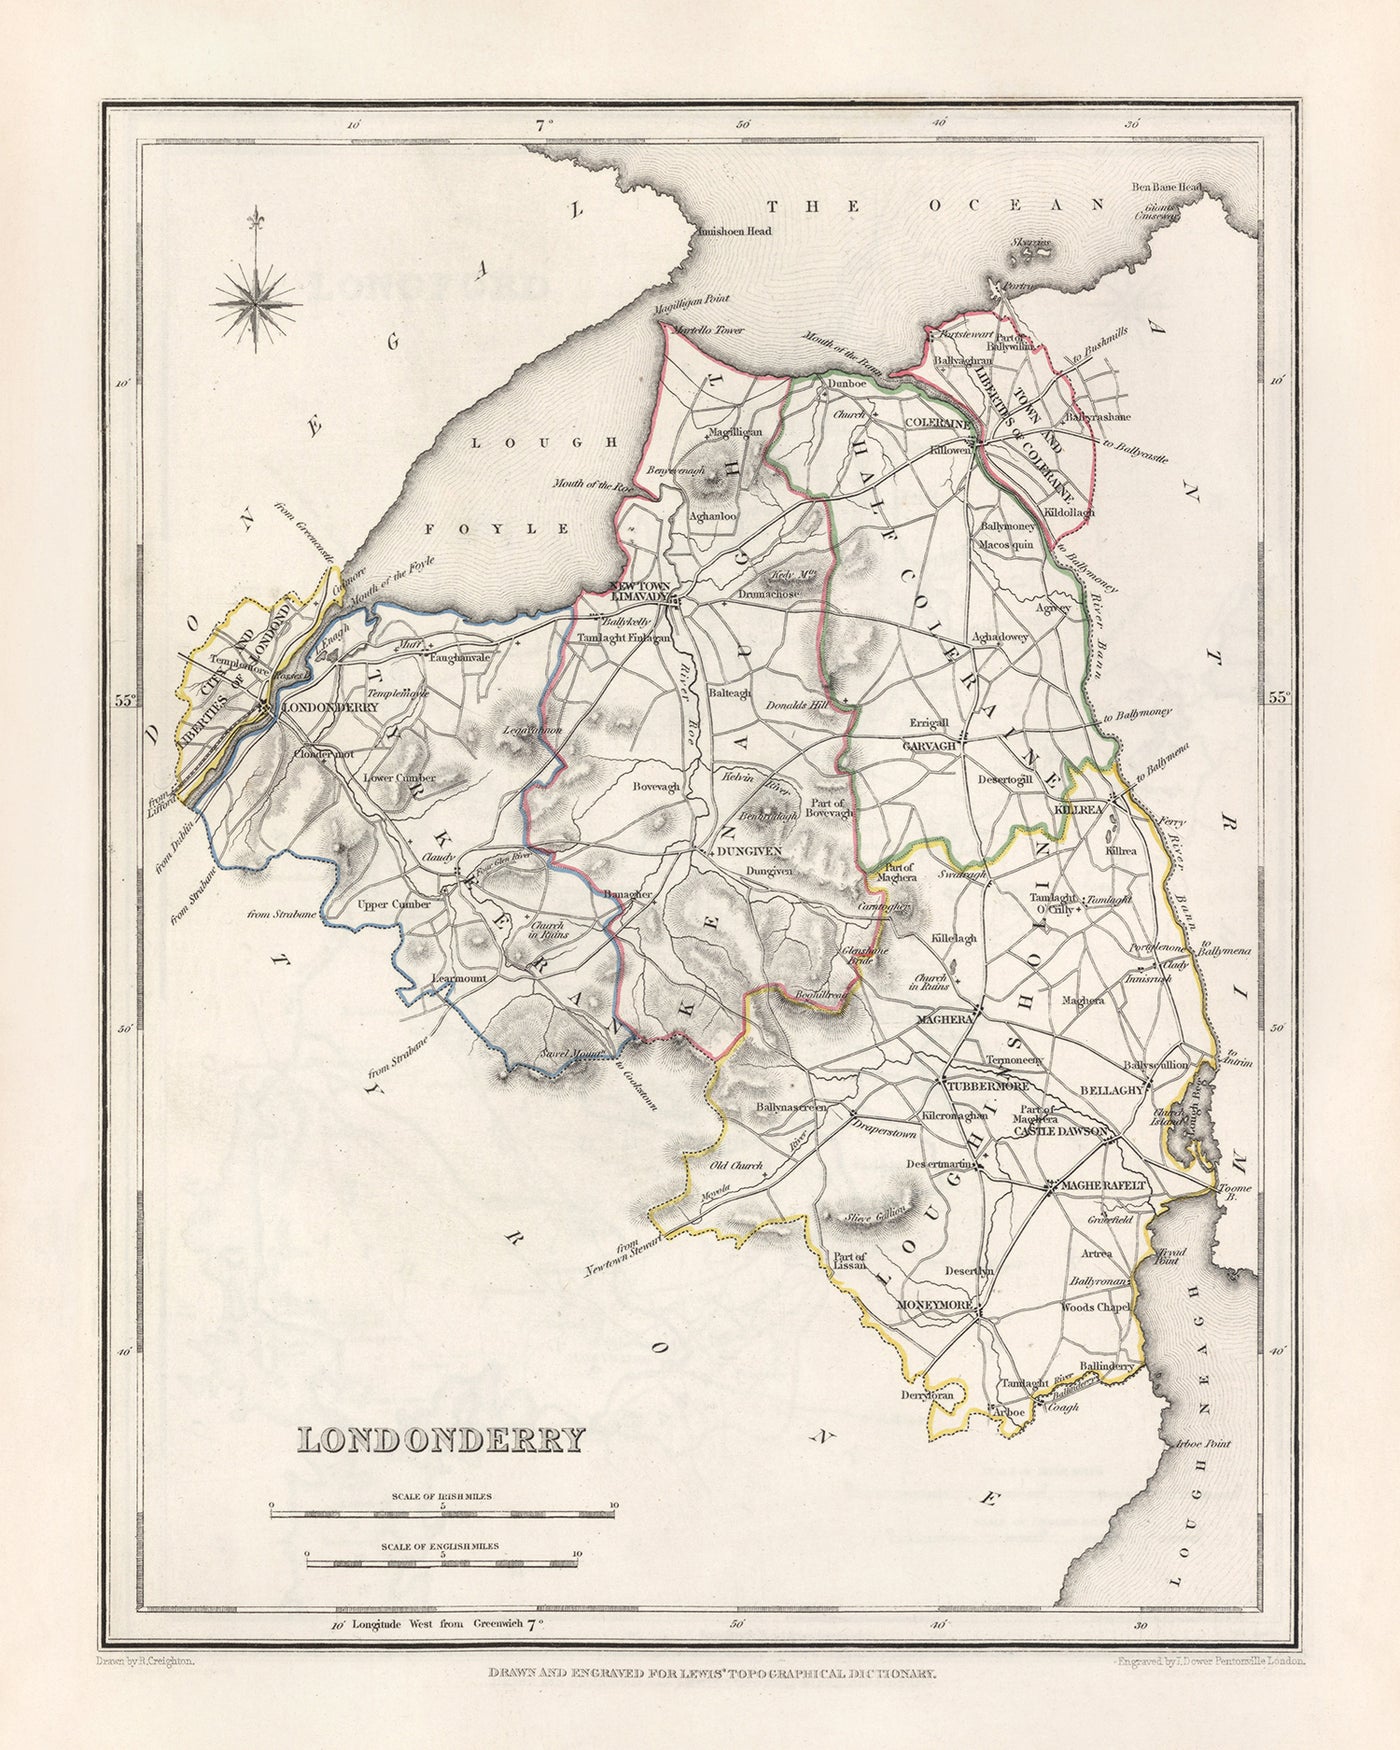 Old Map of County Londonderry by Samuel Lewis, 1844: Coleraine, Limavady, Magherafelt, Portstewart, and The Sperrin Mountains